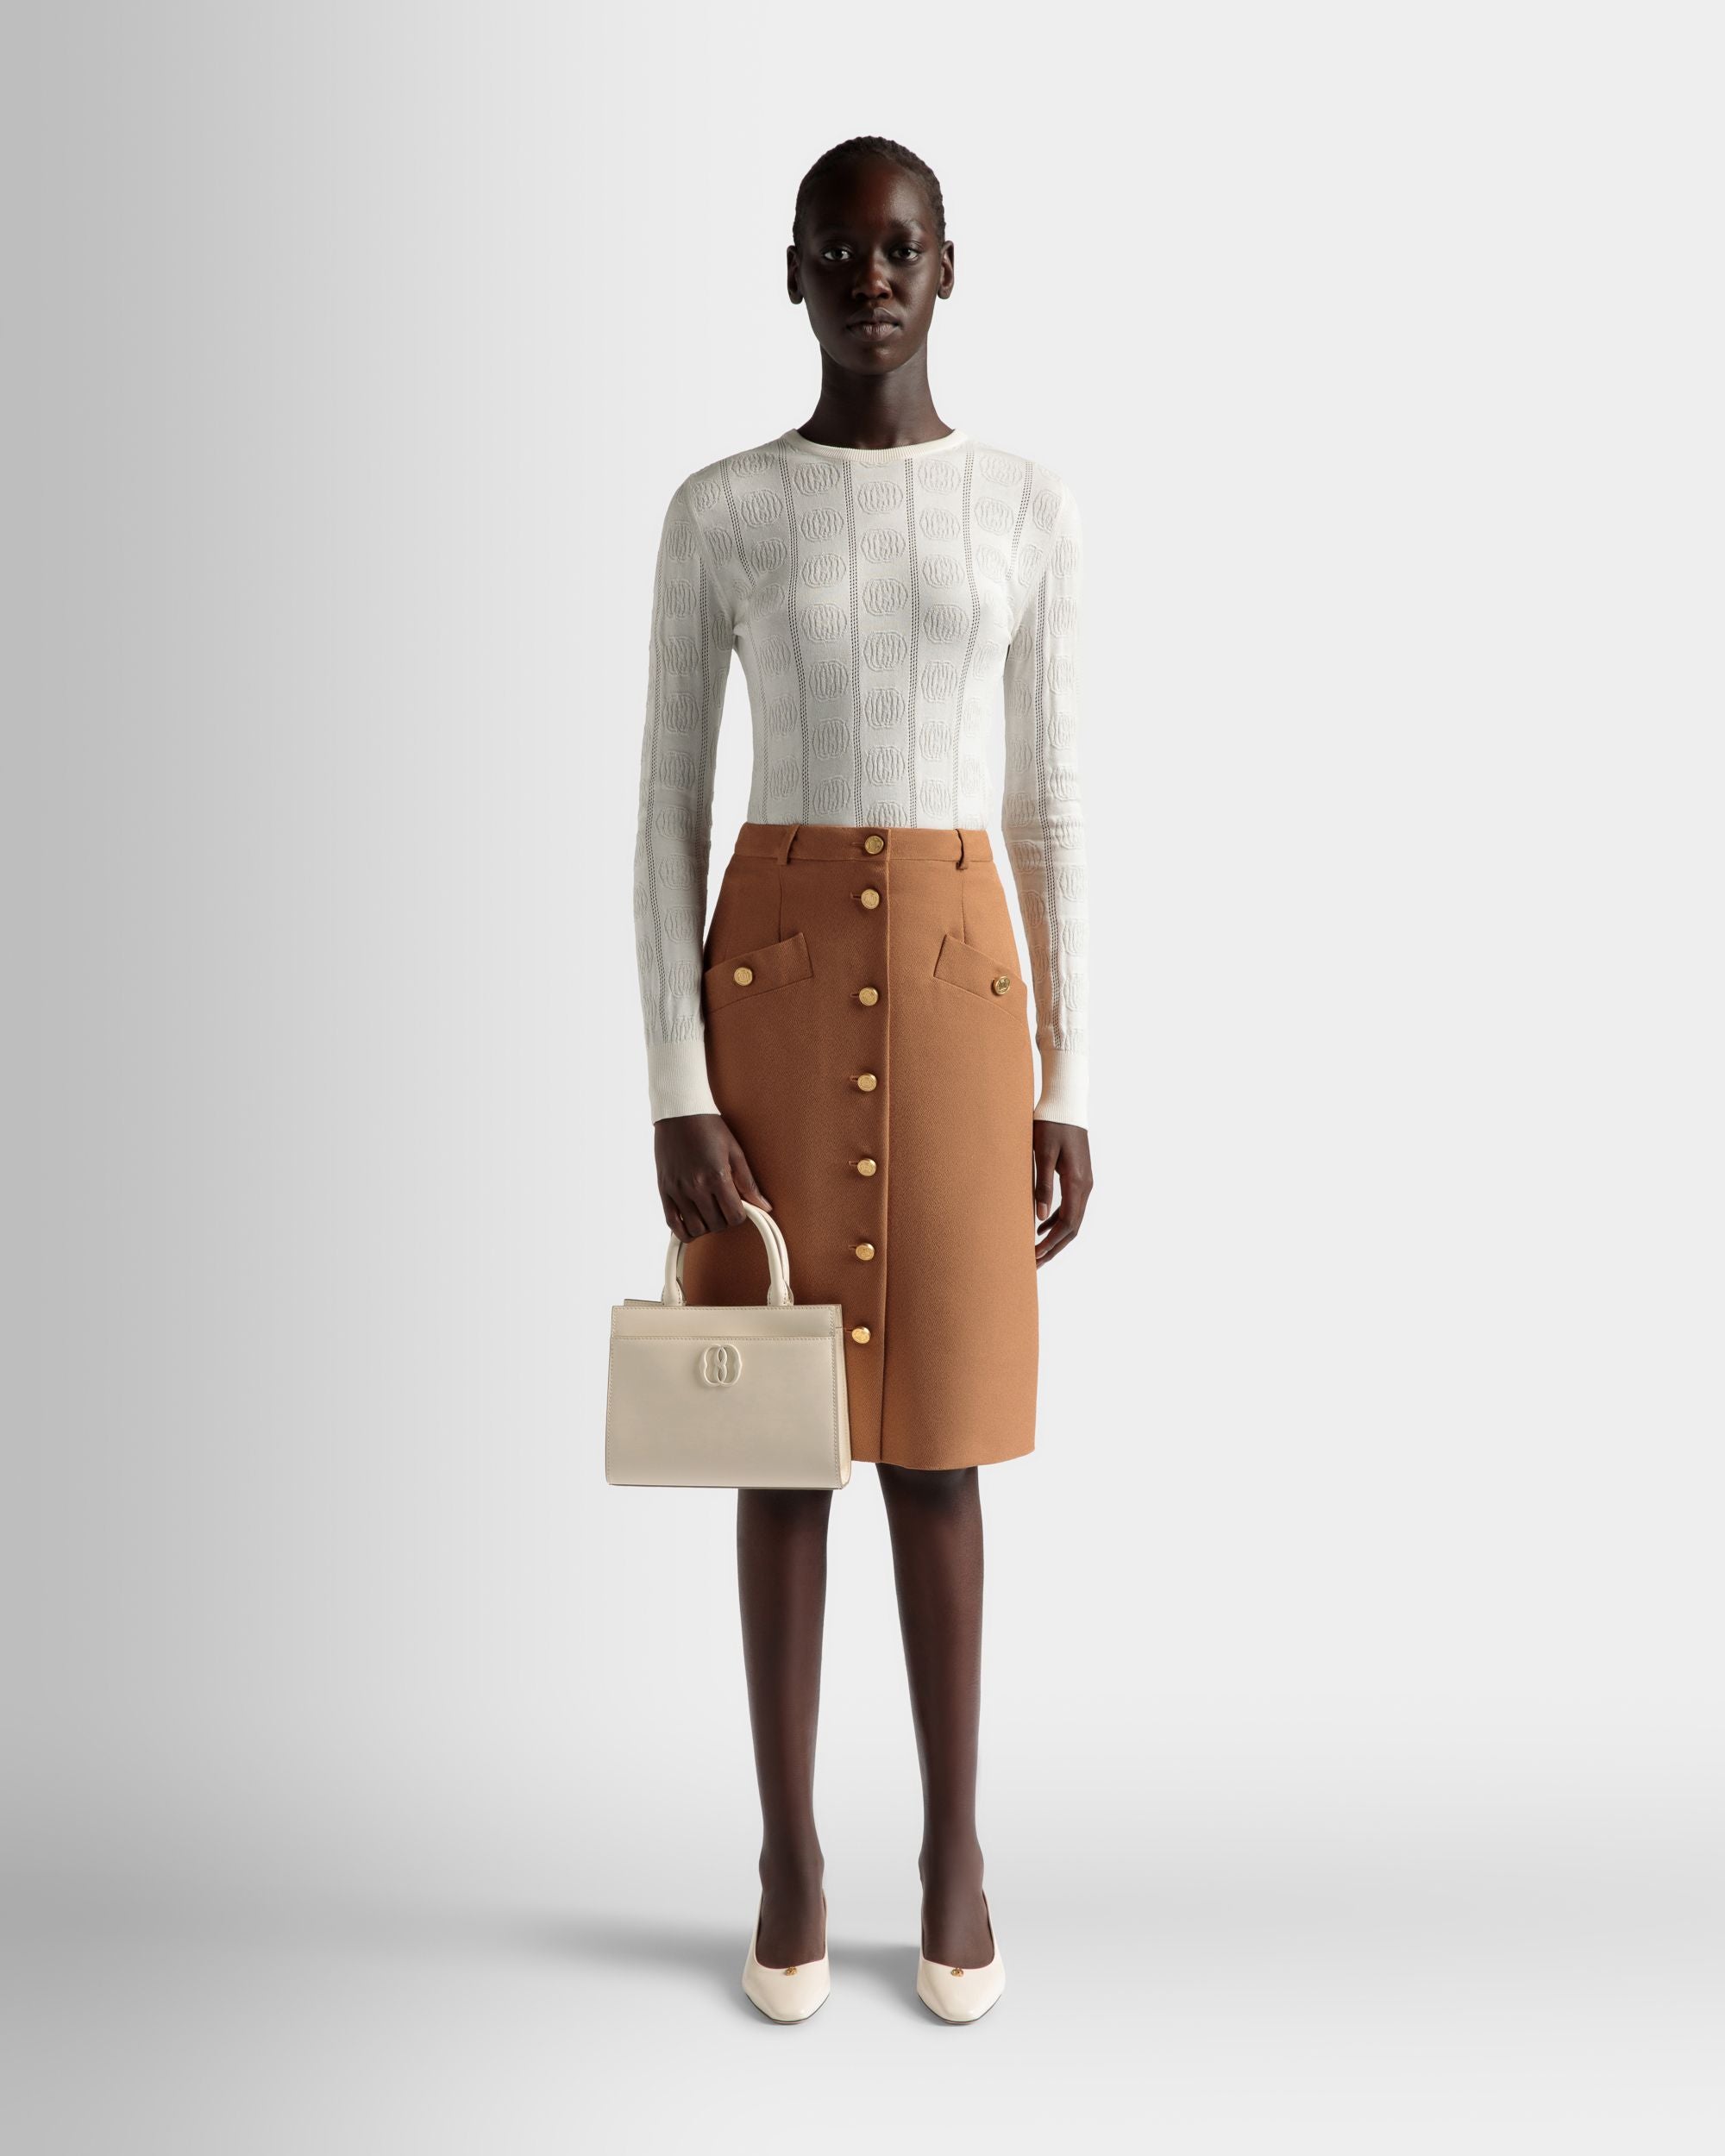 Emblem | Women's Small Tote Bag in White Brushed Leather | Bally | On Model Front